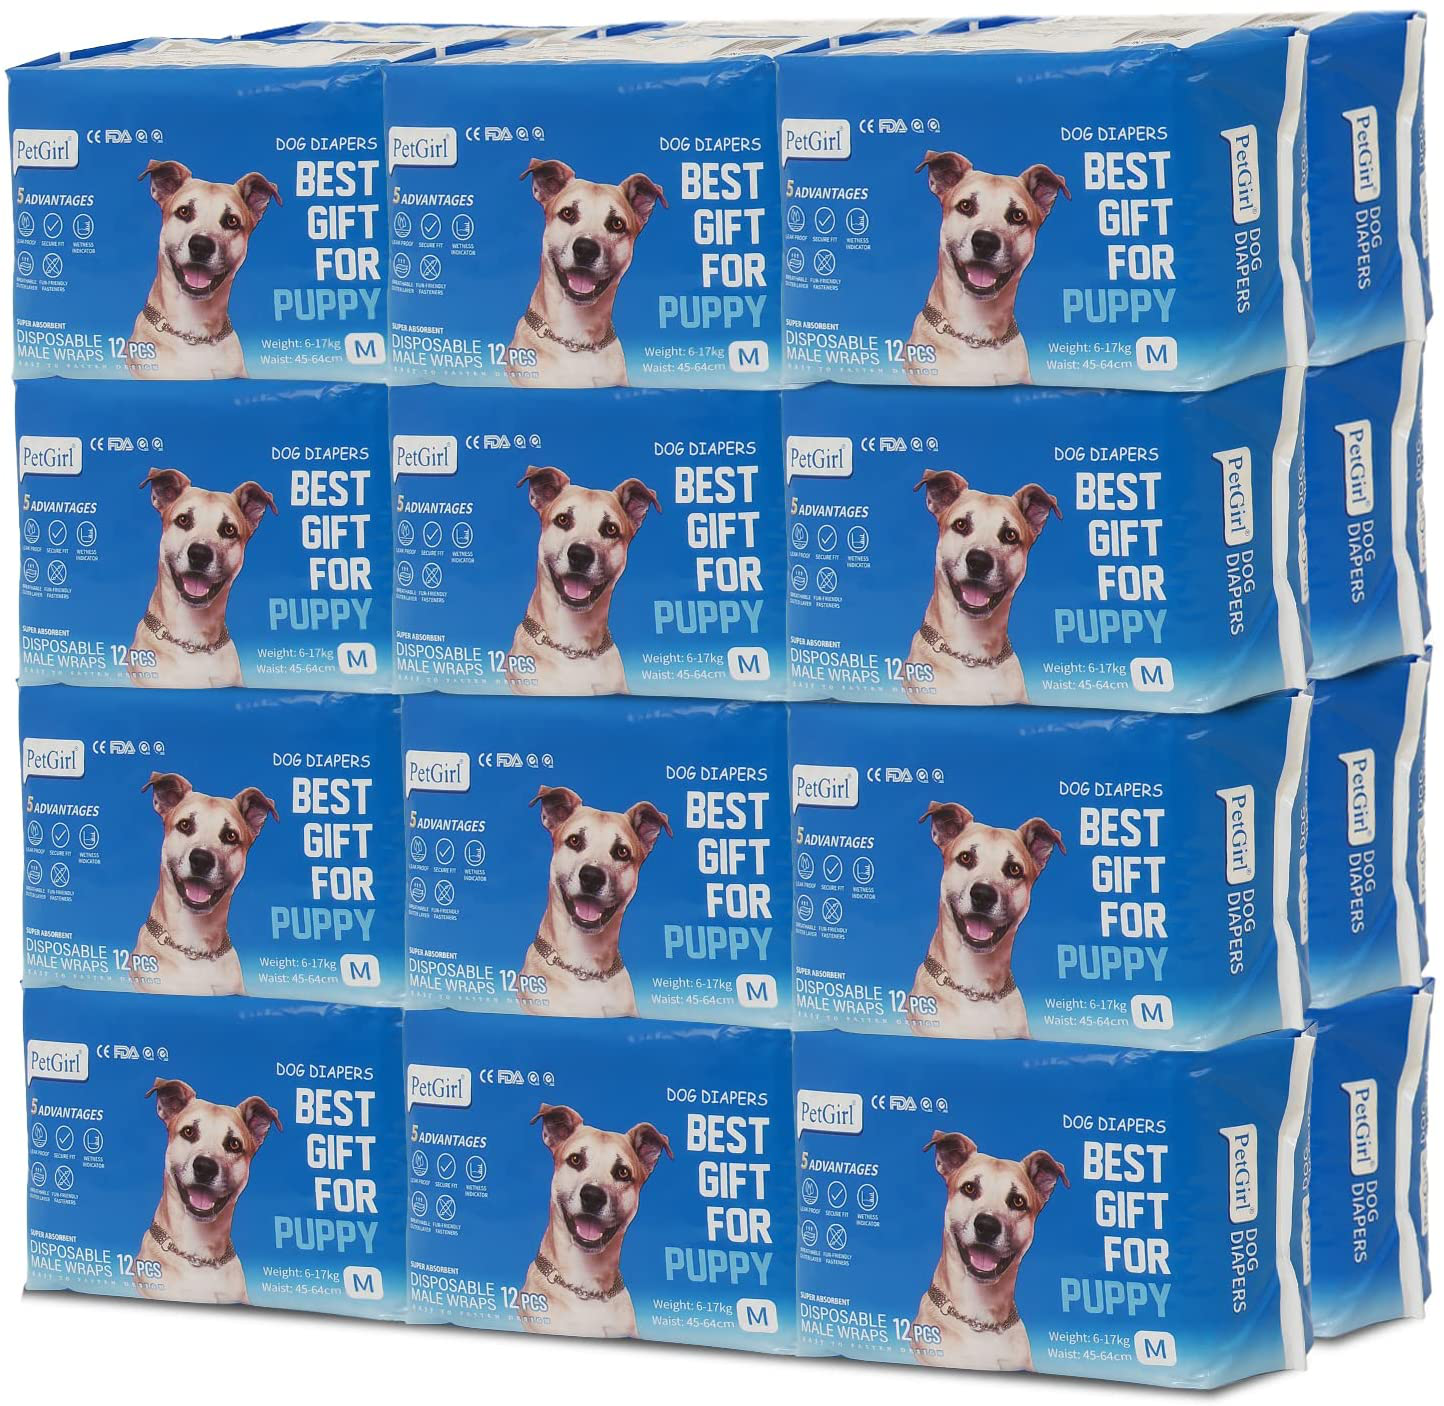 SHAREWIN Male Dog Diapers 12-288PCS Disposable Wraps&Doggie Physiological Pants Pet Diaper Paper| Excitable Urination, Incontinence, or Male Marking Animals & Pet Supplies > Pet Supplies > Dog Supplies > Dog Diaper Pads & Liners SHAREWIN 288PCS Medium 